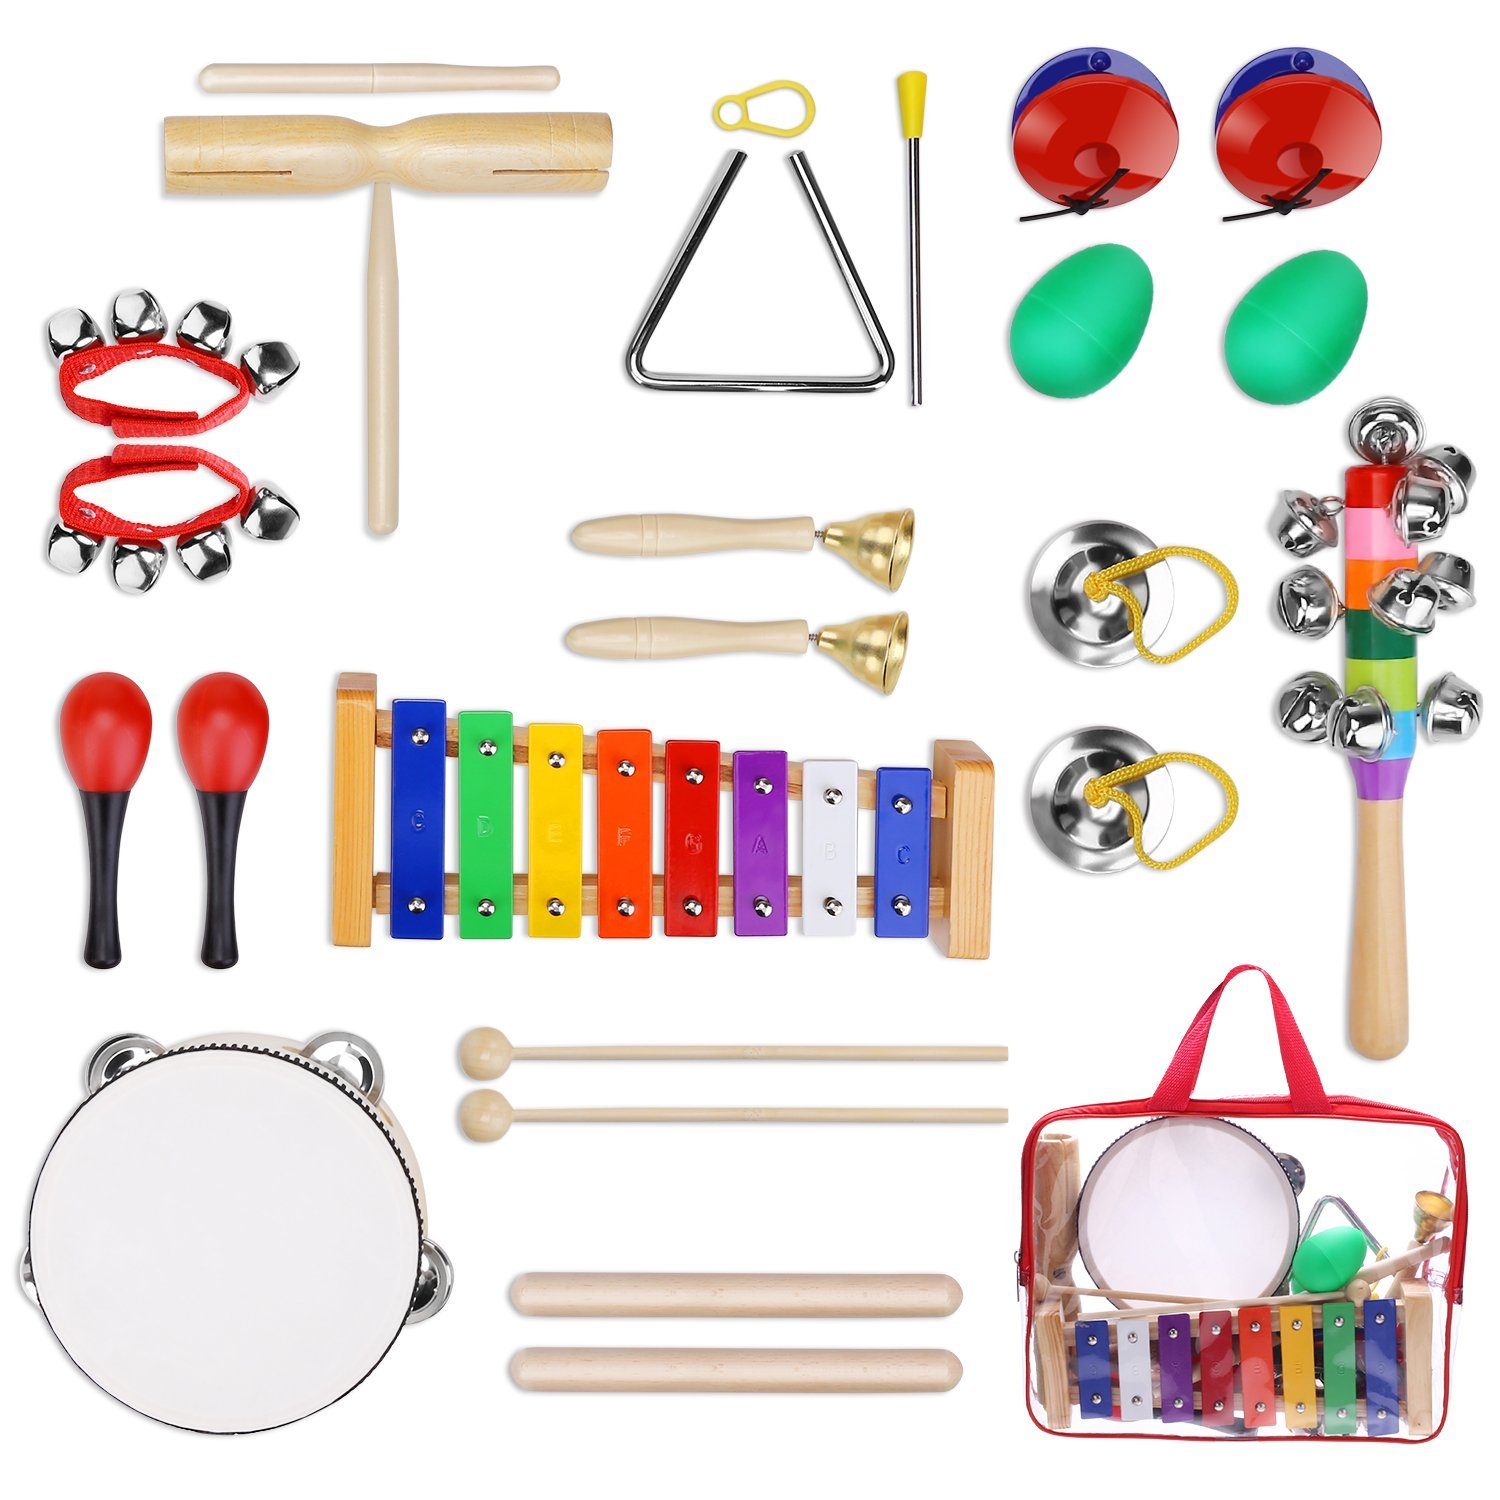 12 Piece Kids Musical Instruments Set Only $36.99 Shipped!